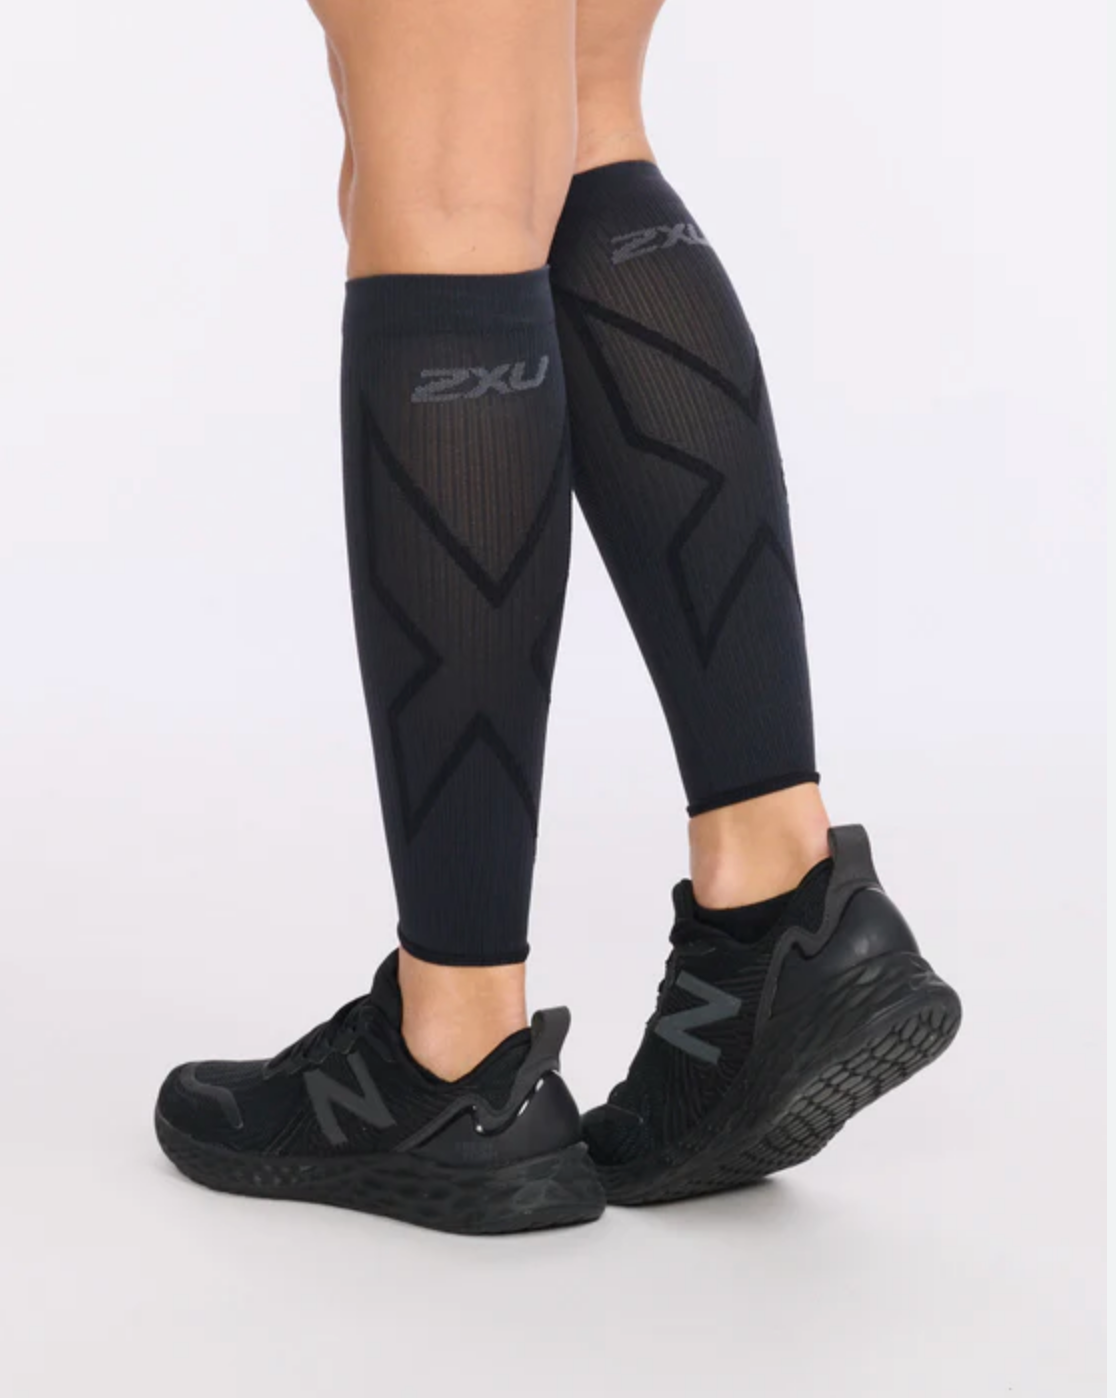 X Compression Calf Sleeves